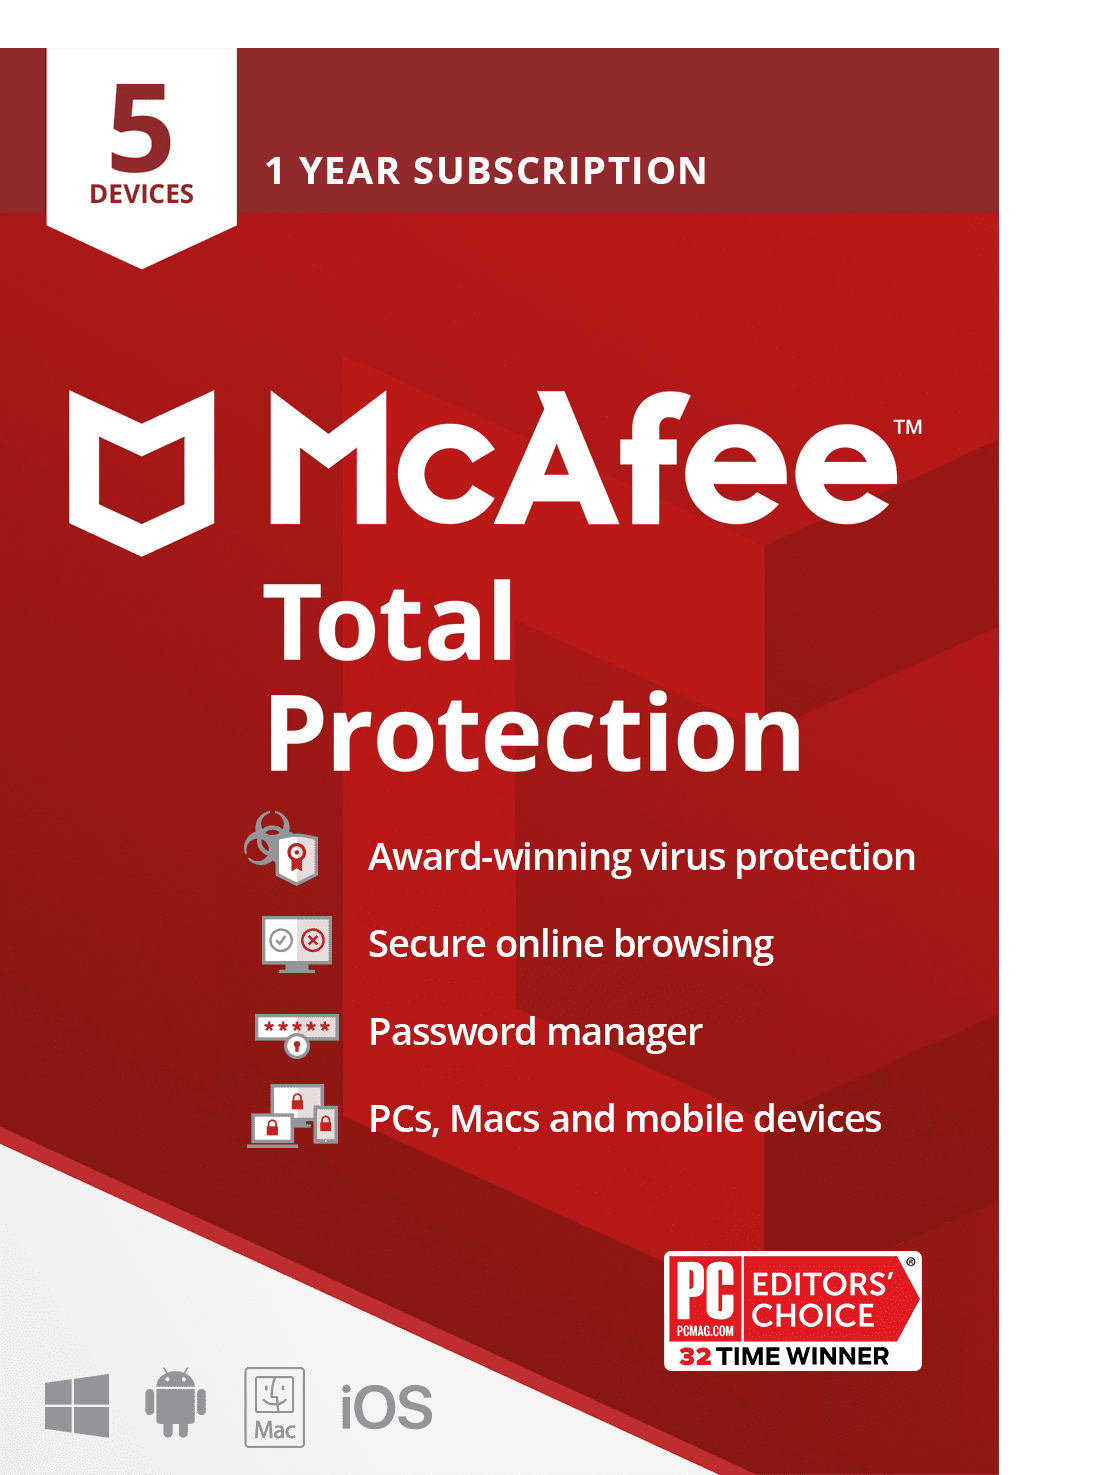 5. McAfee Total Protection: A comprehensive security suite that safeguards your devices against viruses, spyware, and online threats.
6. AVG Antivirus: A reliable antivirus tool that offers essential protection for your computer and online activities.